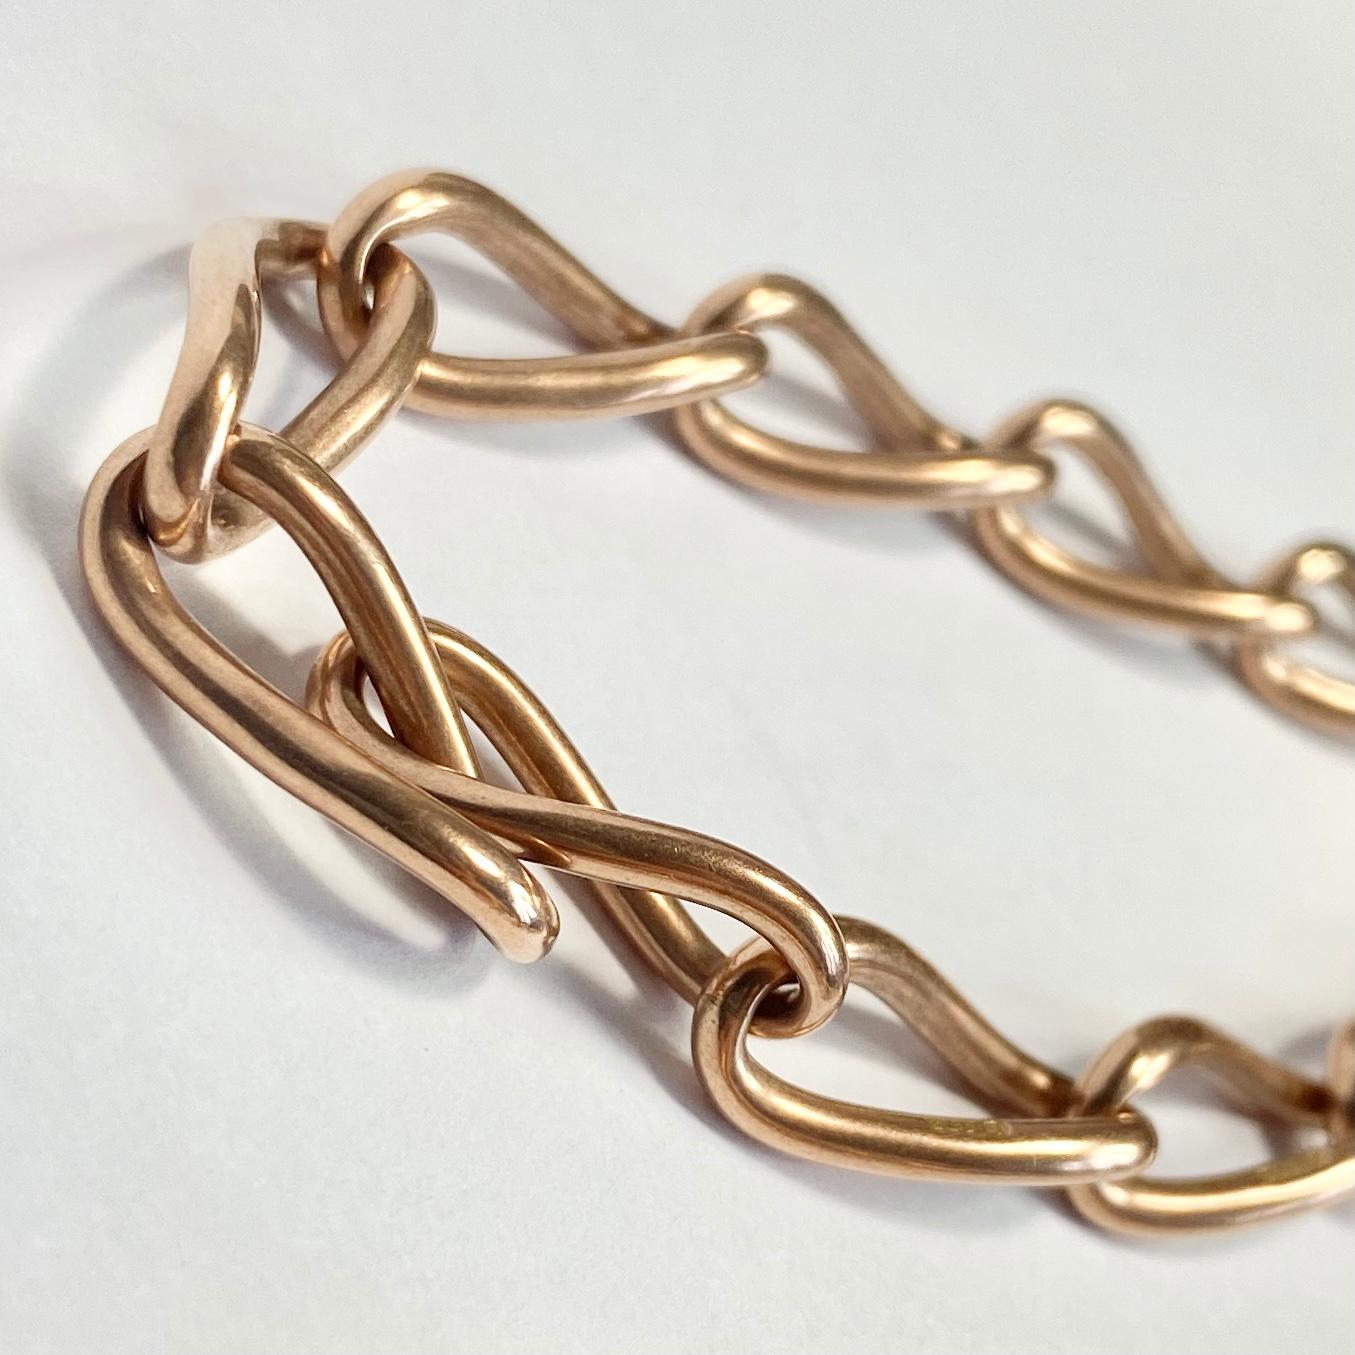 This chunky albert chain is made up of large links and can be worn as a necklace. On one end there is a dog clip and the chain also holds a t-bar. Modelled in 9ct rose gold. 

Length inc fob: 34.5cm 
Chain Width: 8mm 

Weight: 38g